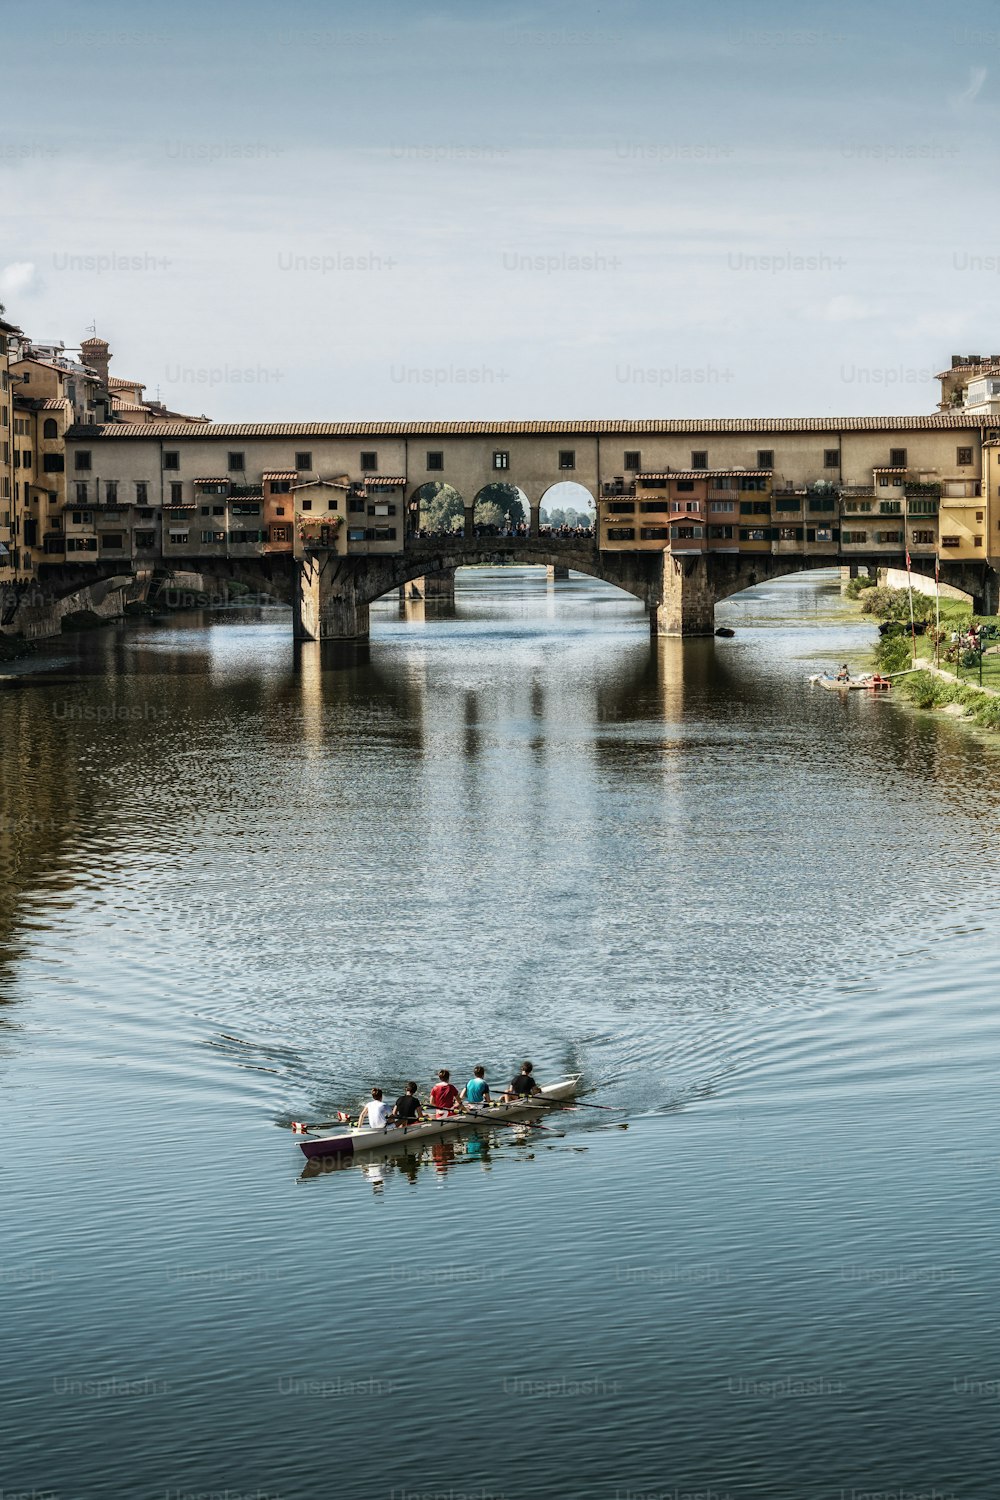 Florence Ponte Vecchio Bridge and City Skyline in Italy. Florence is capital city of the Tuscany region of central Italy. Florence was center of Italy medieval trade and wealthiest cities of past era.